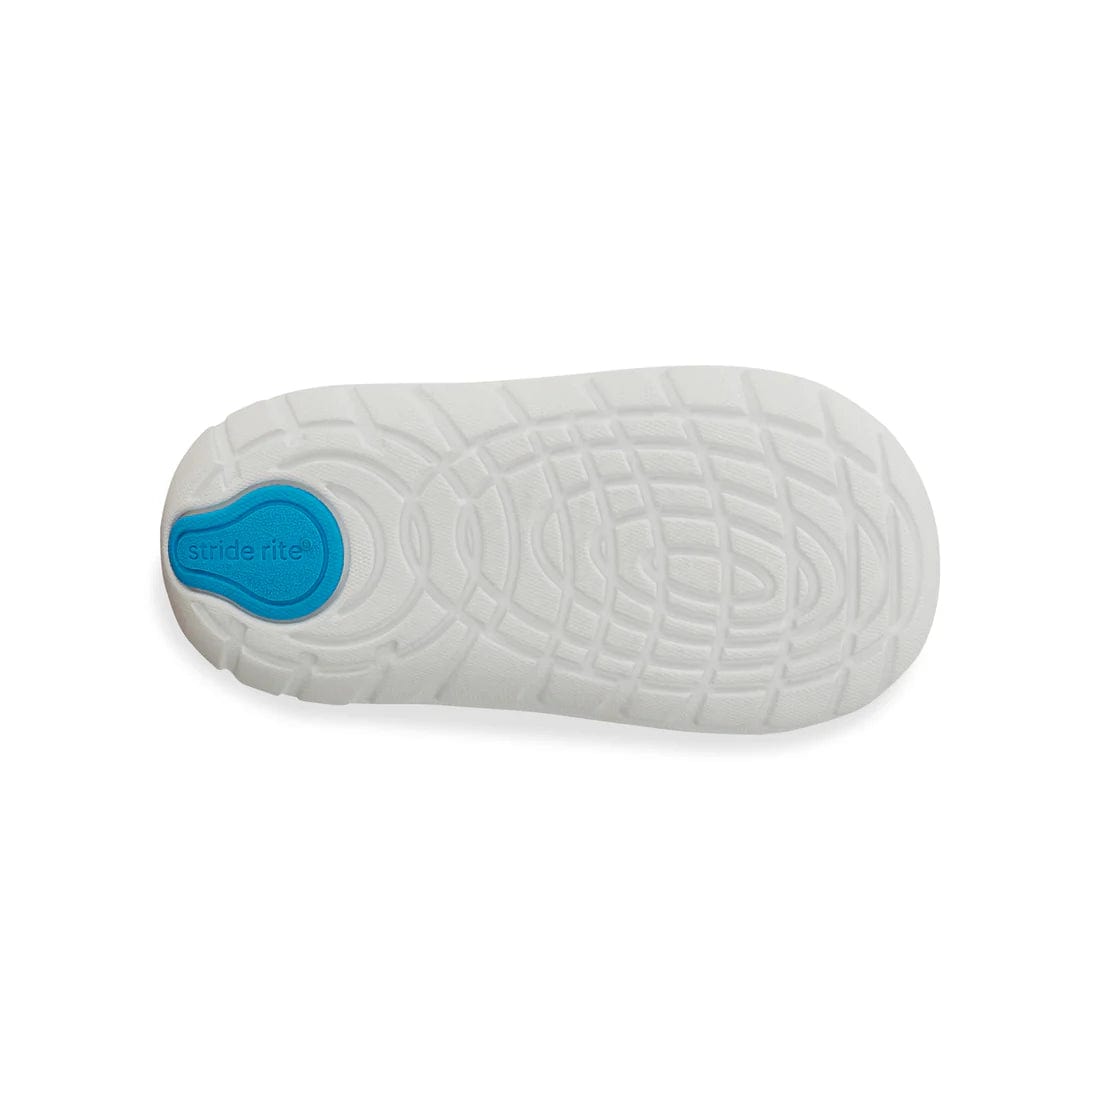 Stride Rite First Step Shoes Stride Rite Turbo - Bright blue